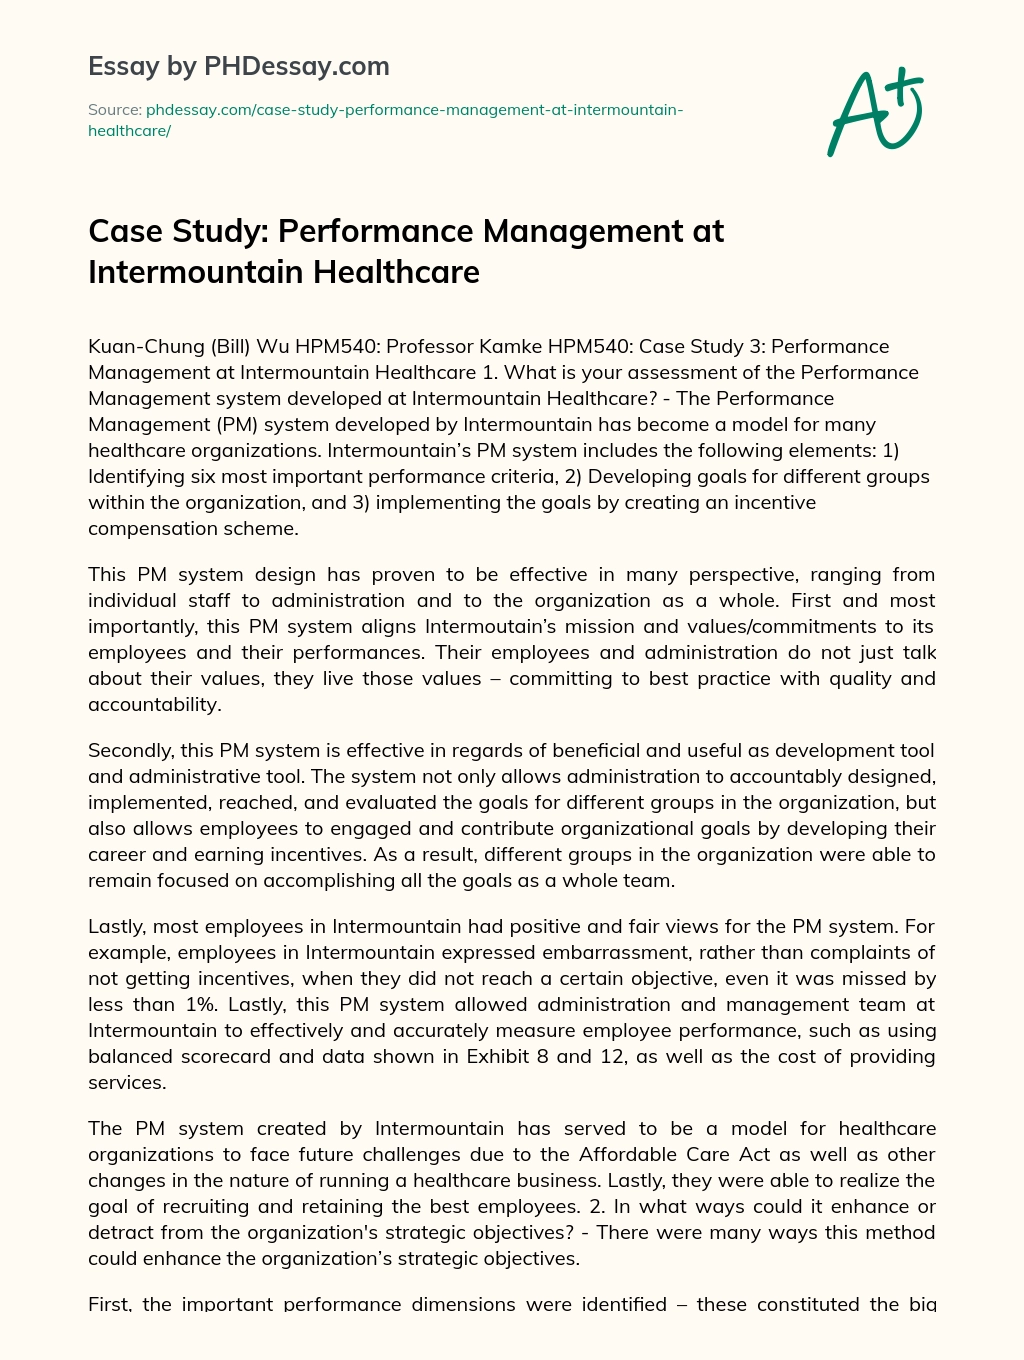 Case Study: Performance Management at Intermountain Healthcare essay